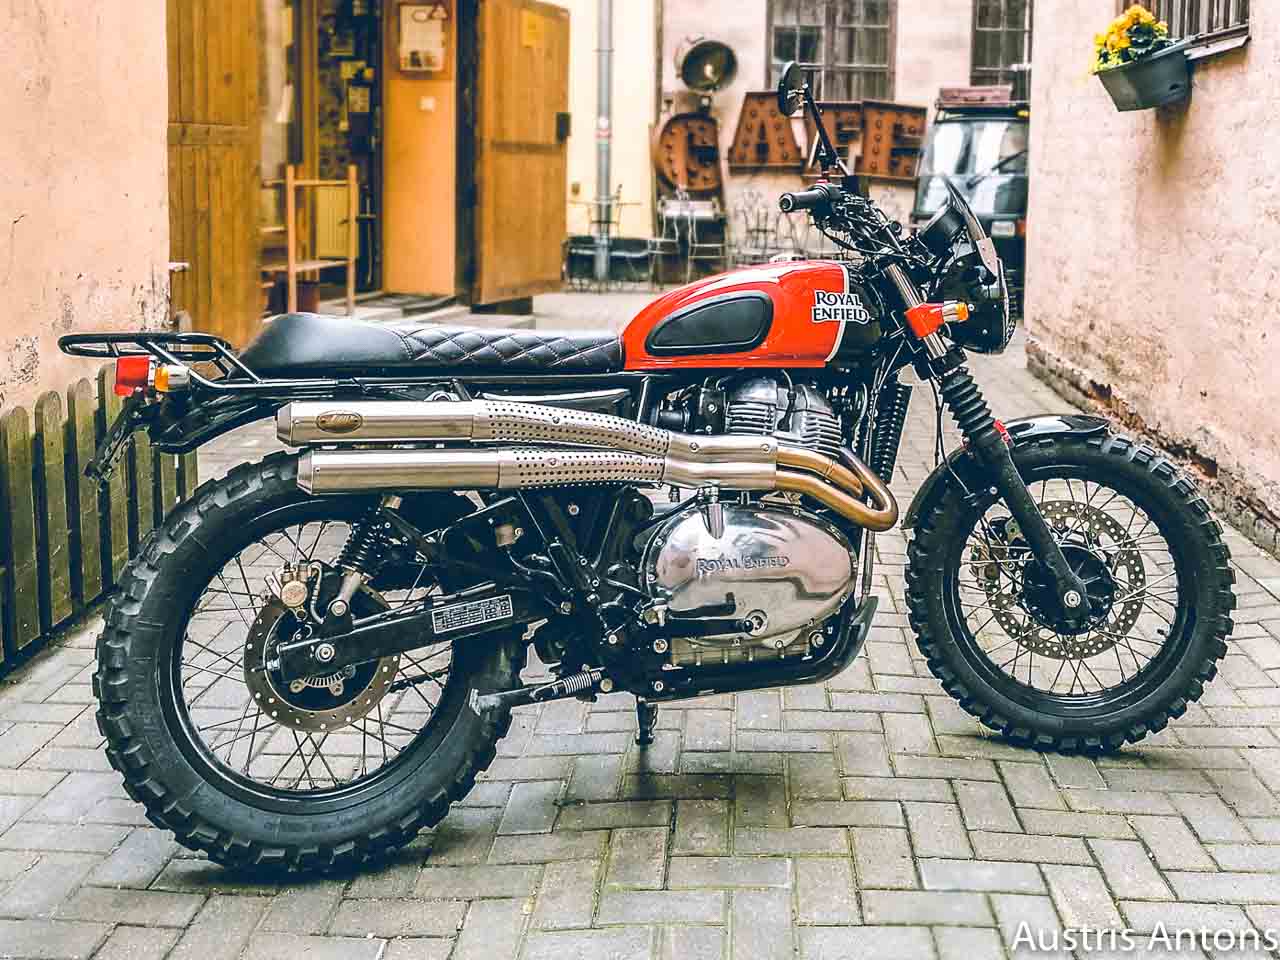 Royal Enfield 650 modified by RE dealer - Limited to 10 units